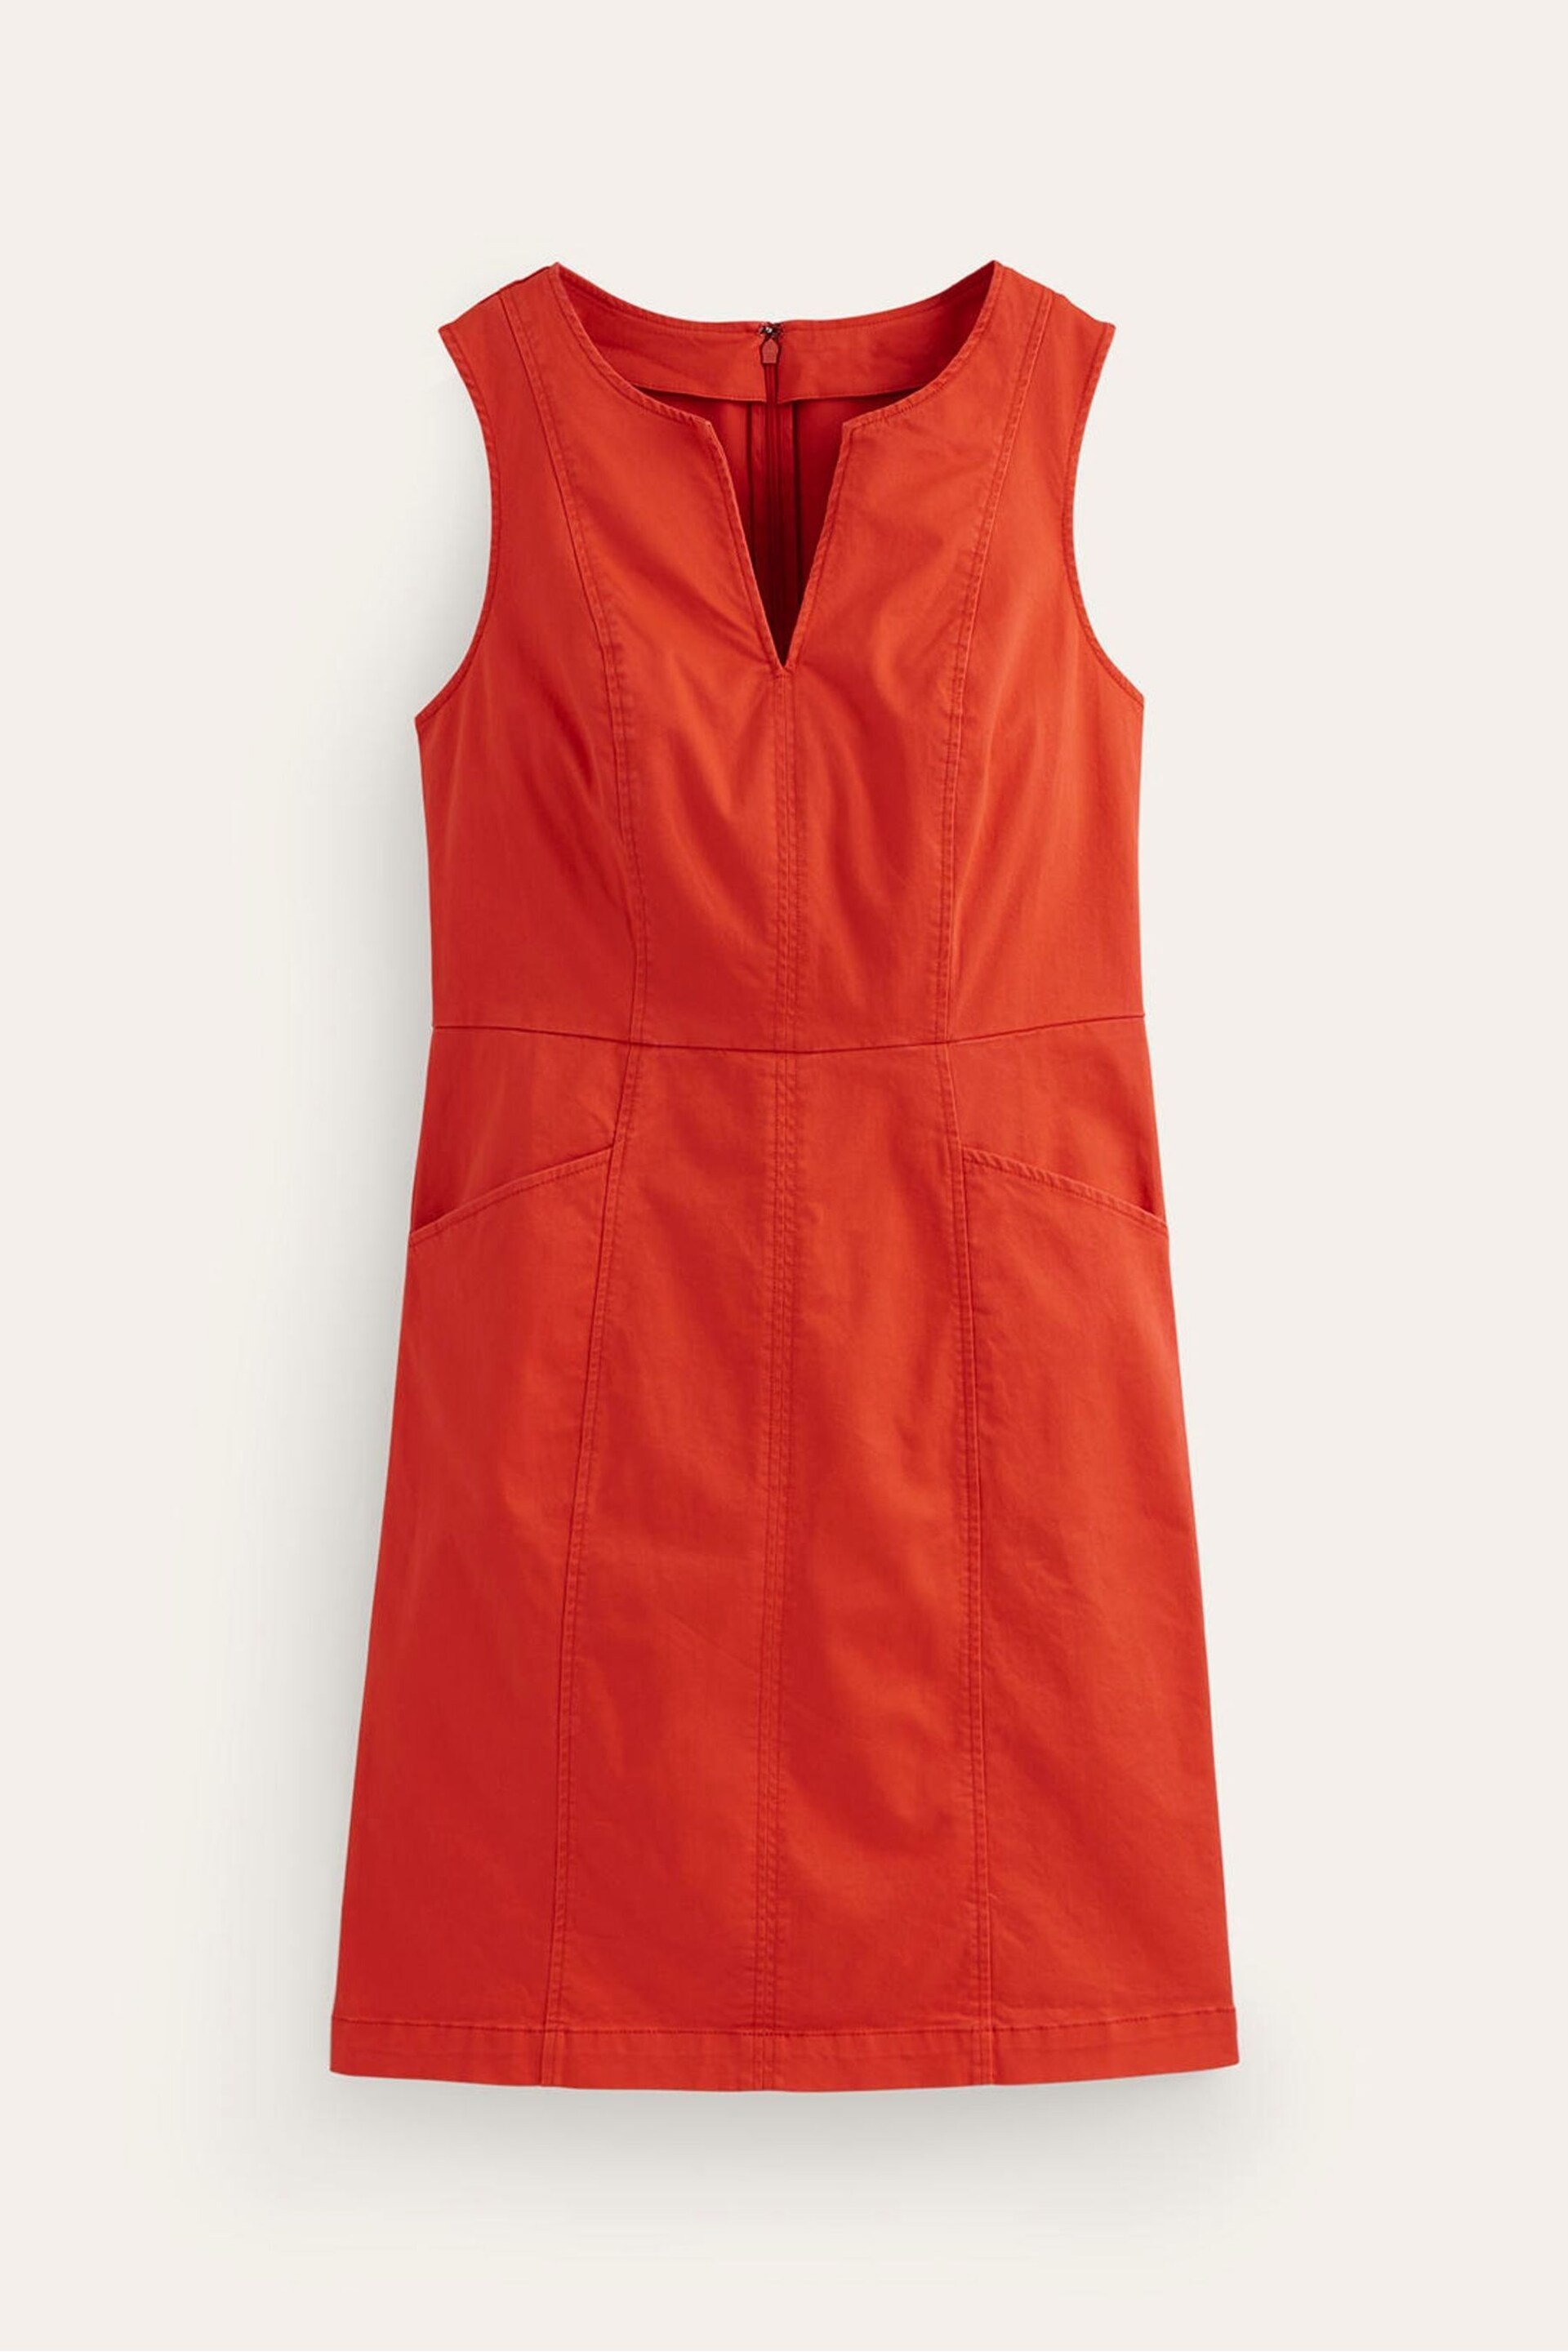 Boden Red Helena Chino Short Dress - Image 4 of 5